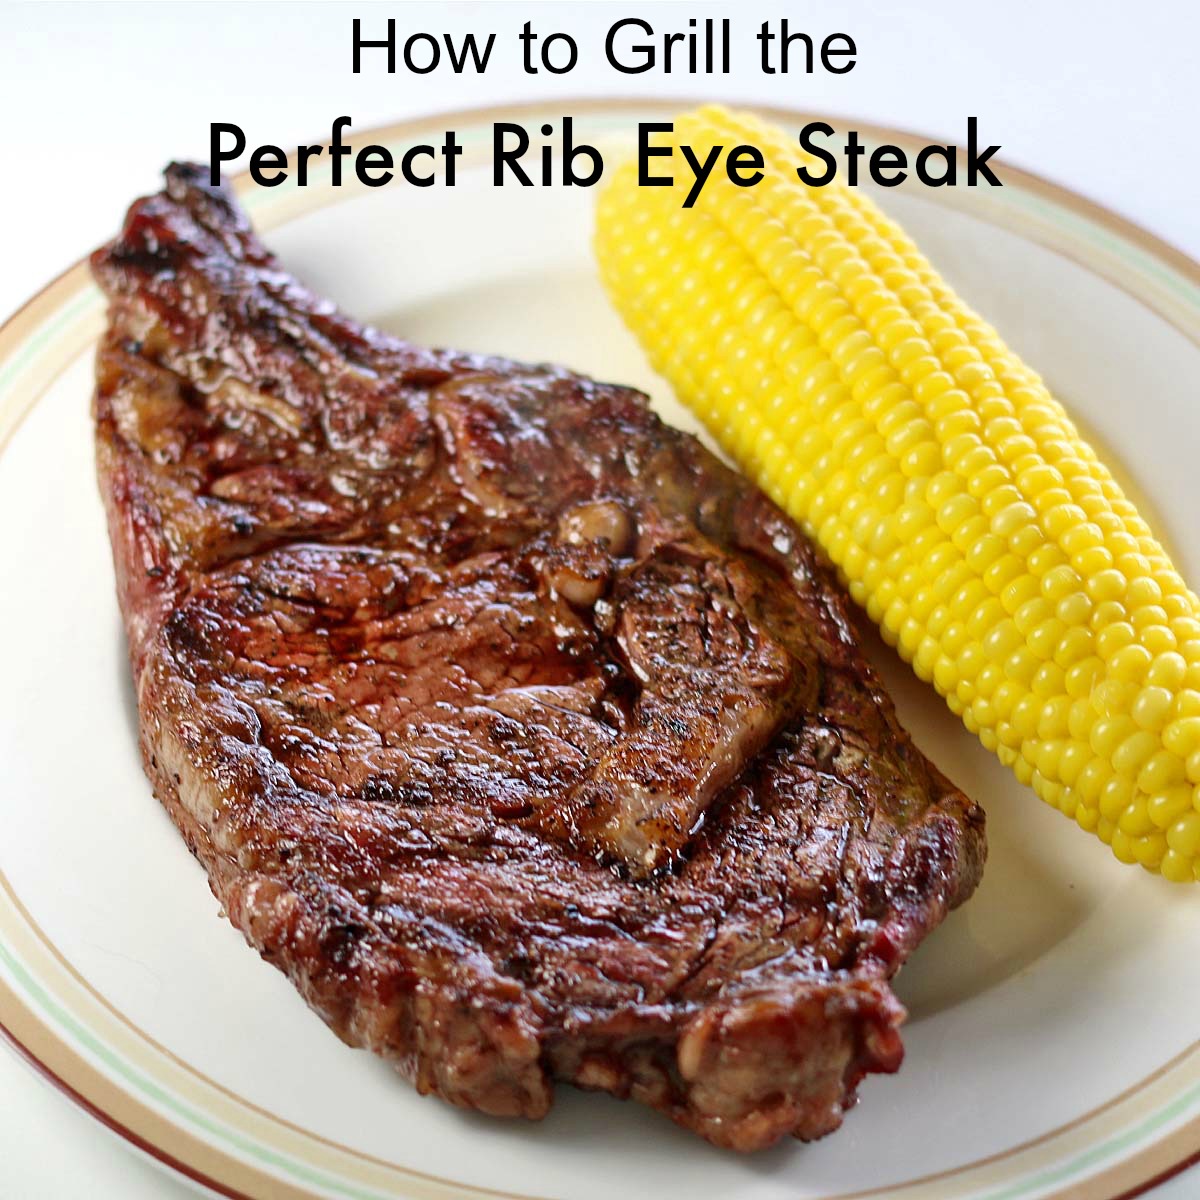 How to Grill the Perfect Rib Eye Steak